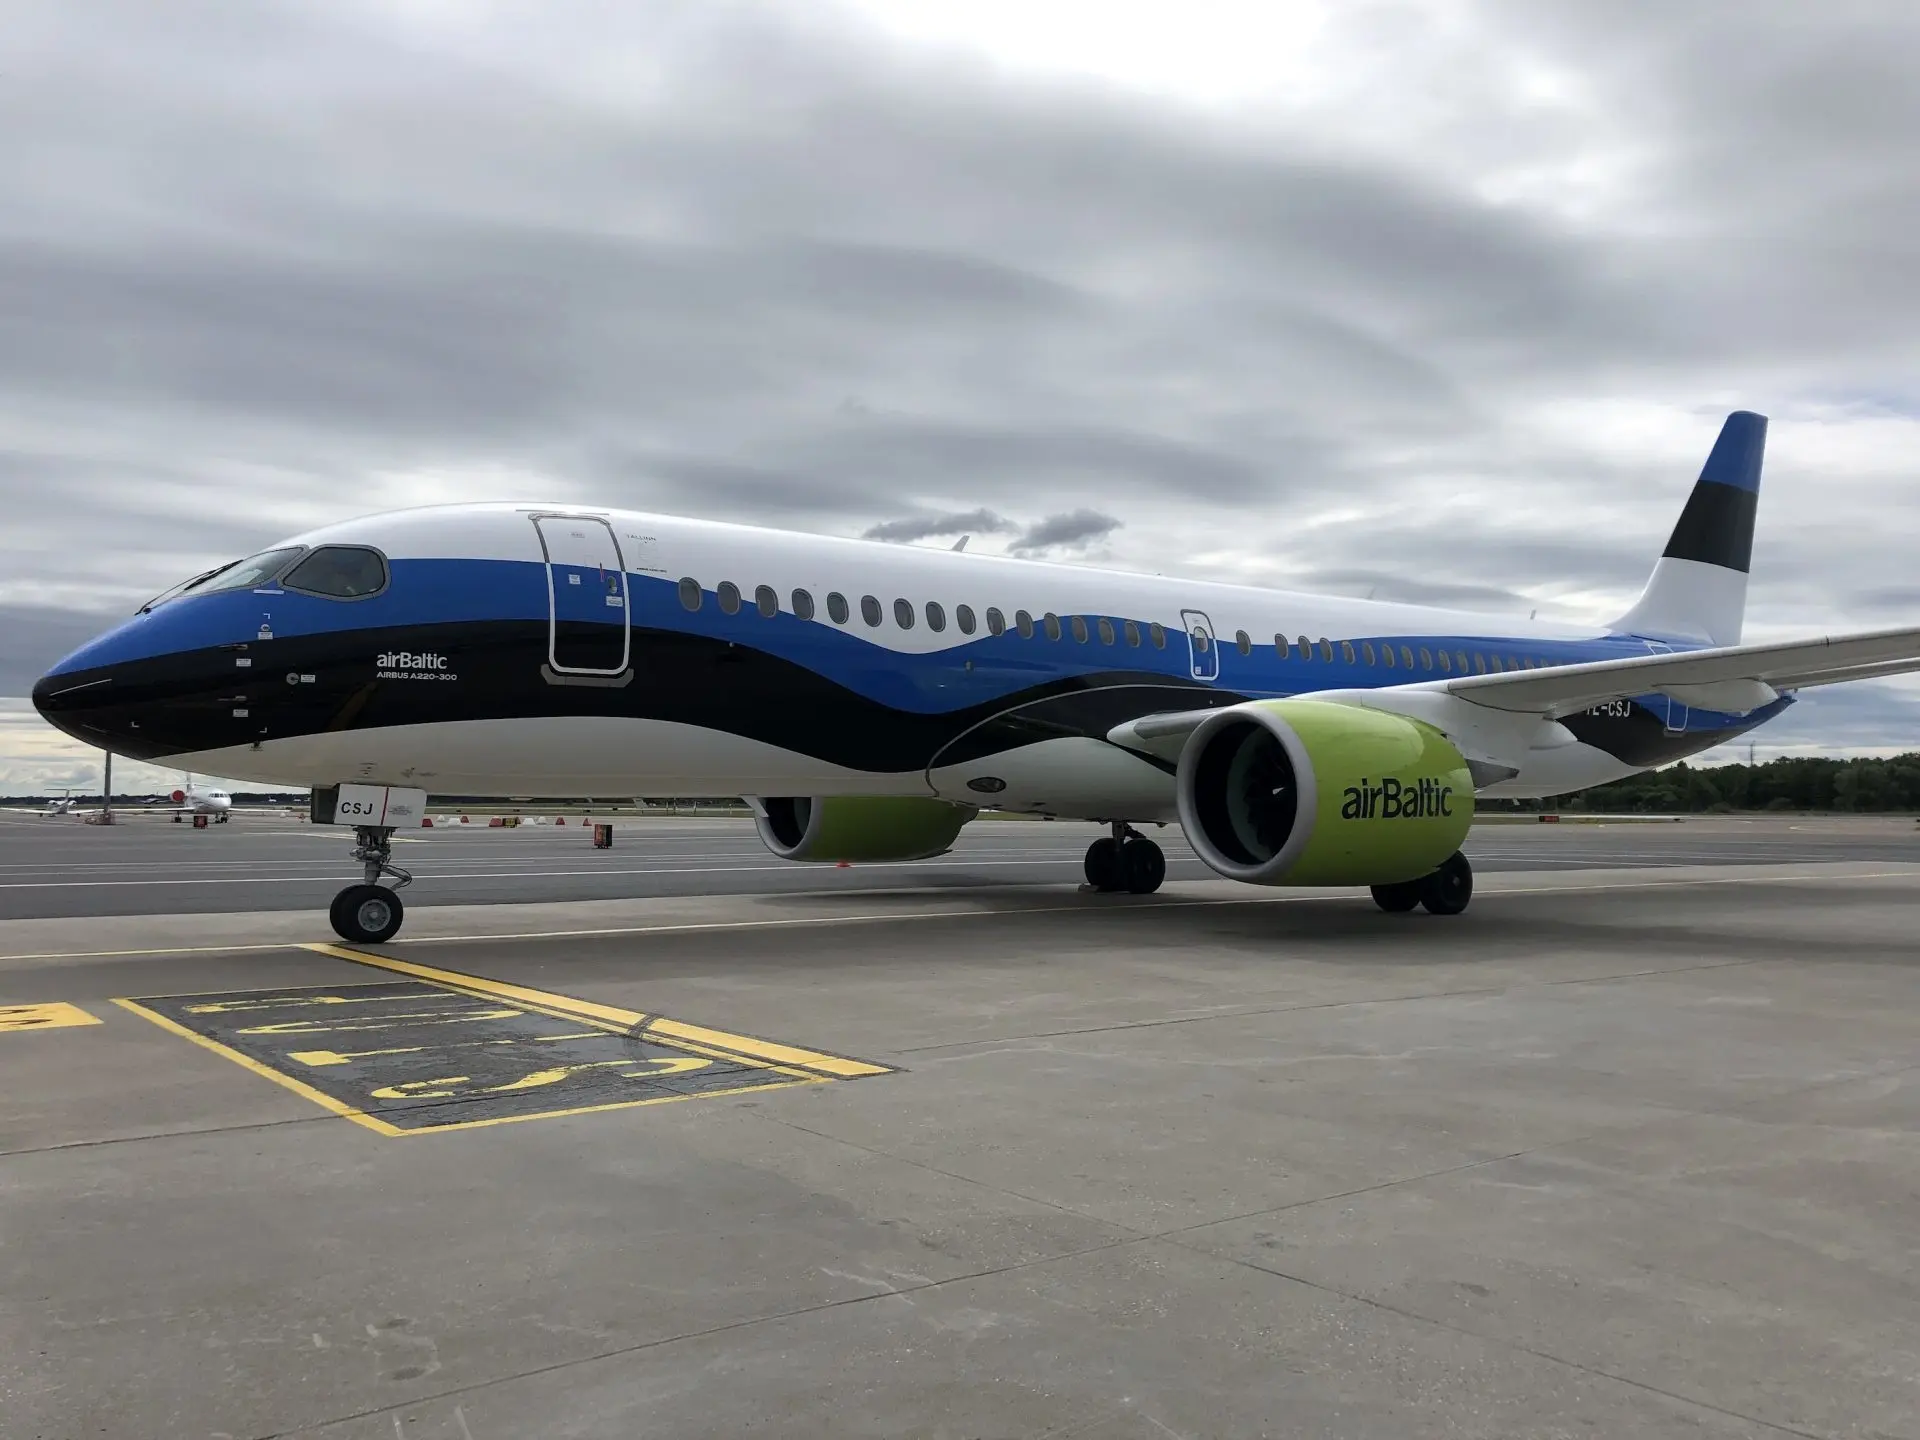 airBaltic celebrates the strong demand in Estonia with special Airbus A220-300 livery